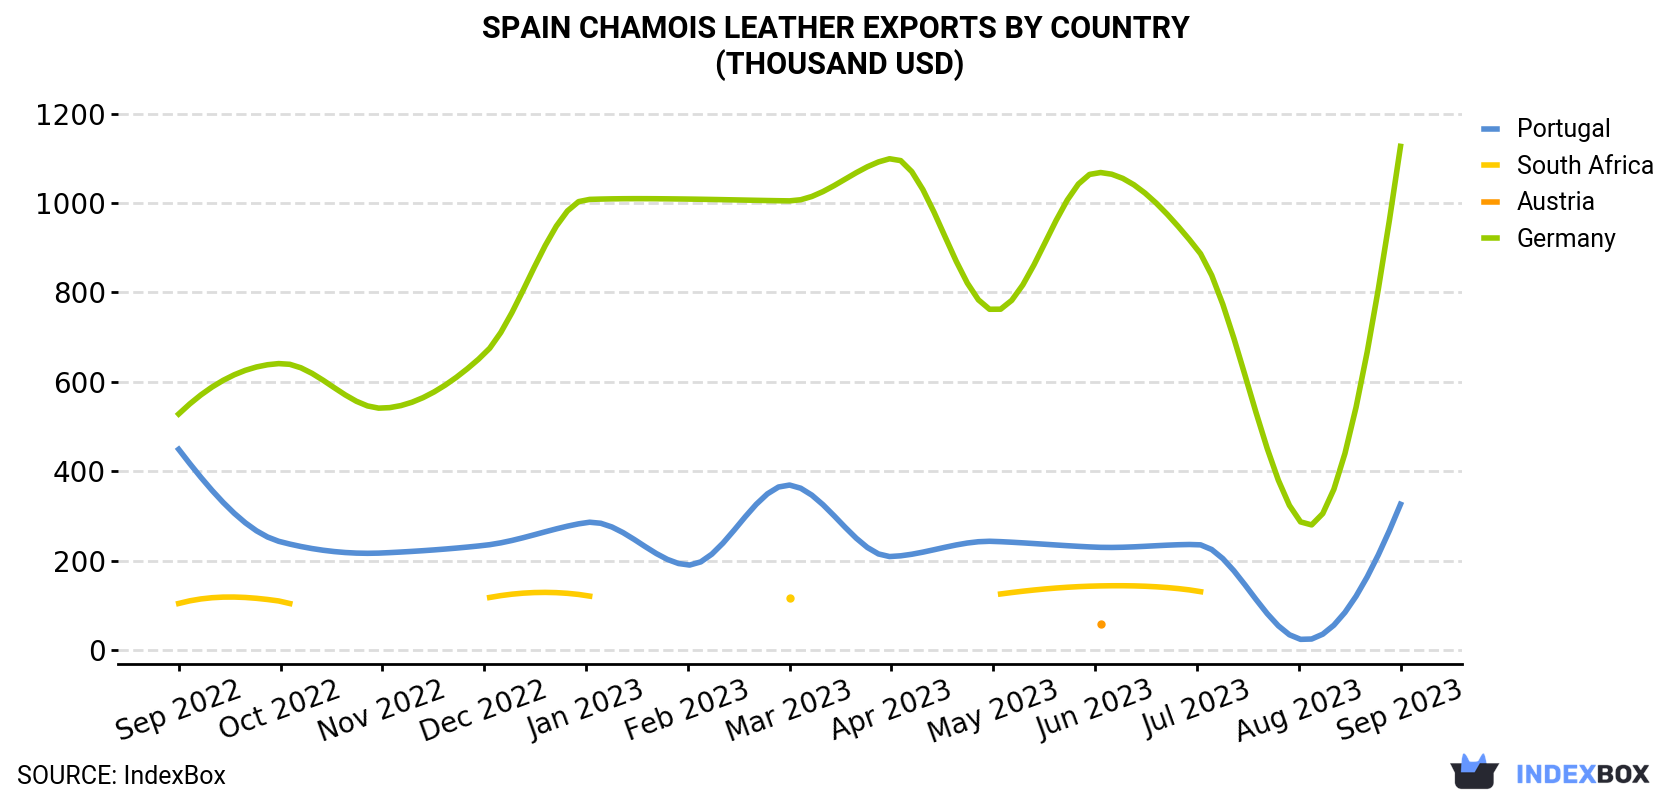 Spain Chamois Leather Exports By Country (Thousand USD)